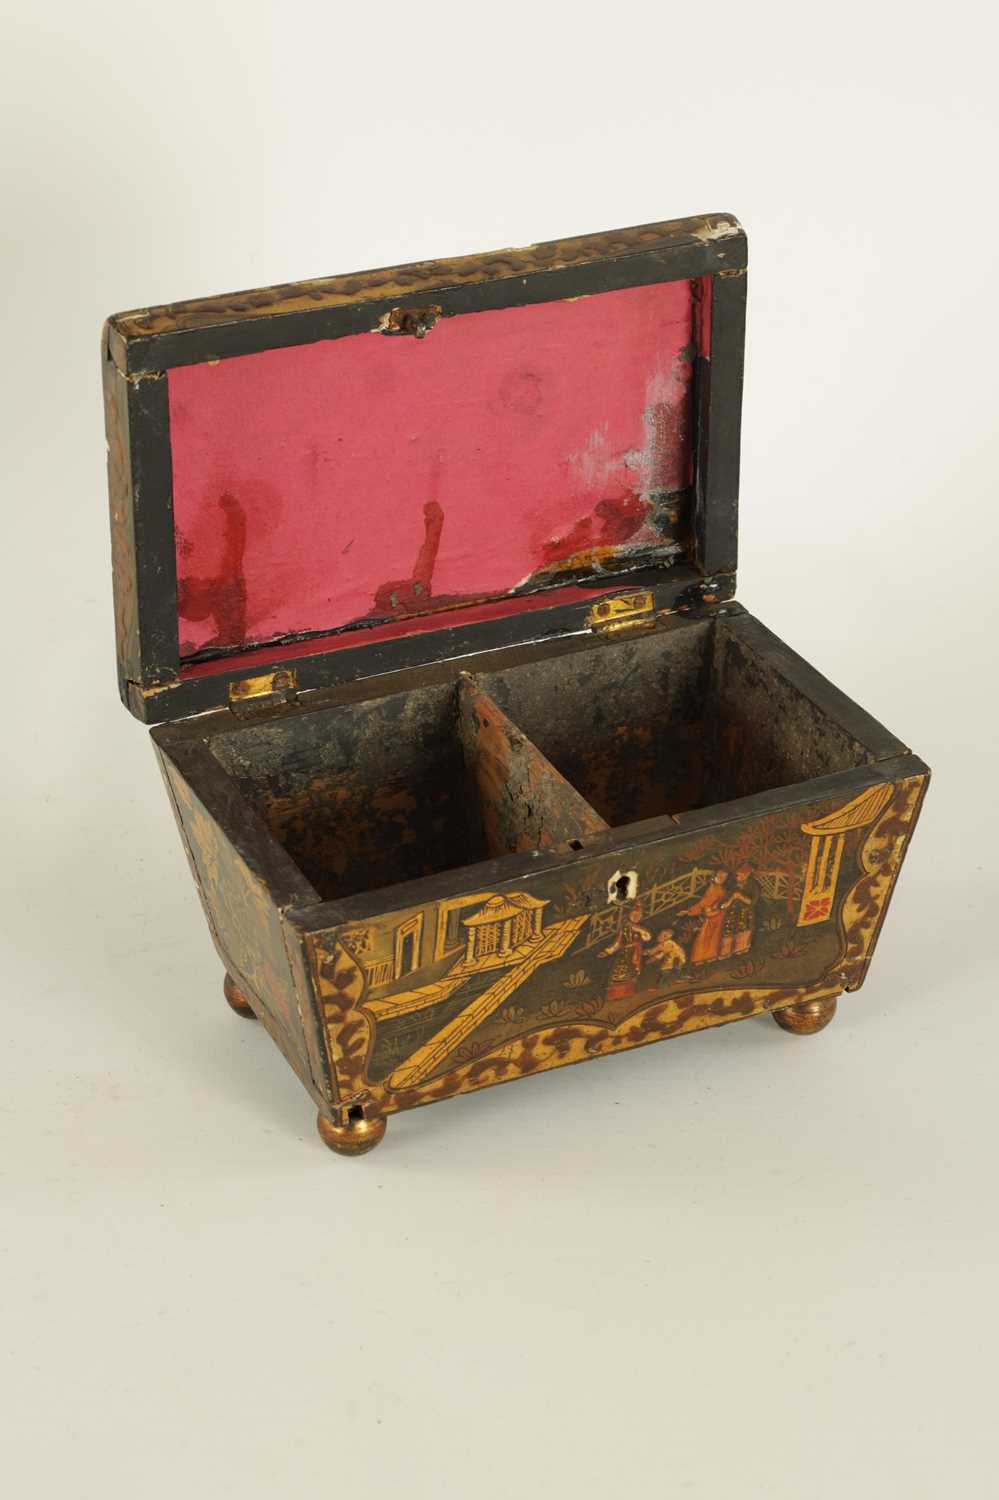 A LATE GEORGIAN CHINOISERIE DECORATED BLACK LACQUER SARCOPHAGUS TEA CADDY - Image 3 of 8